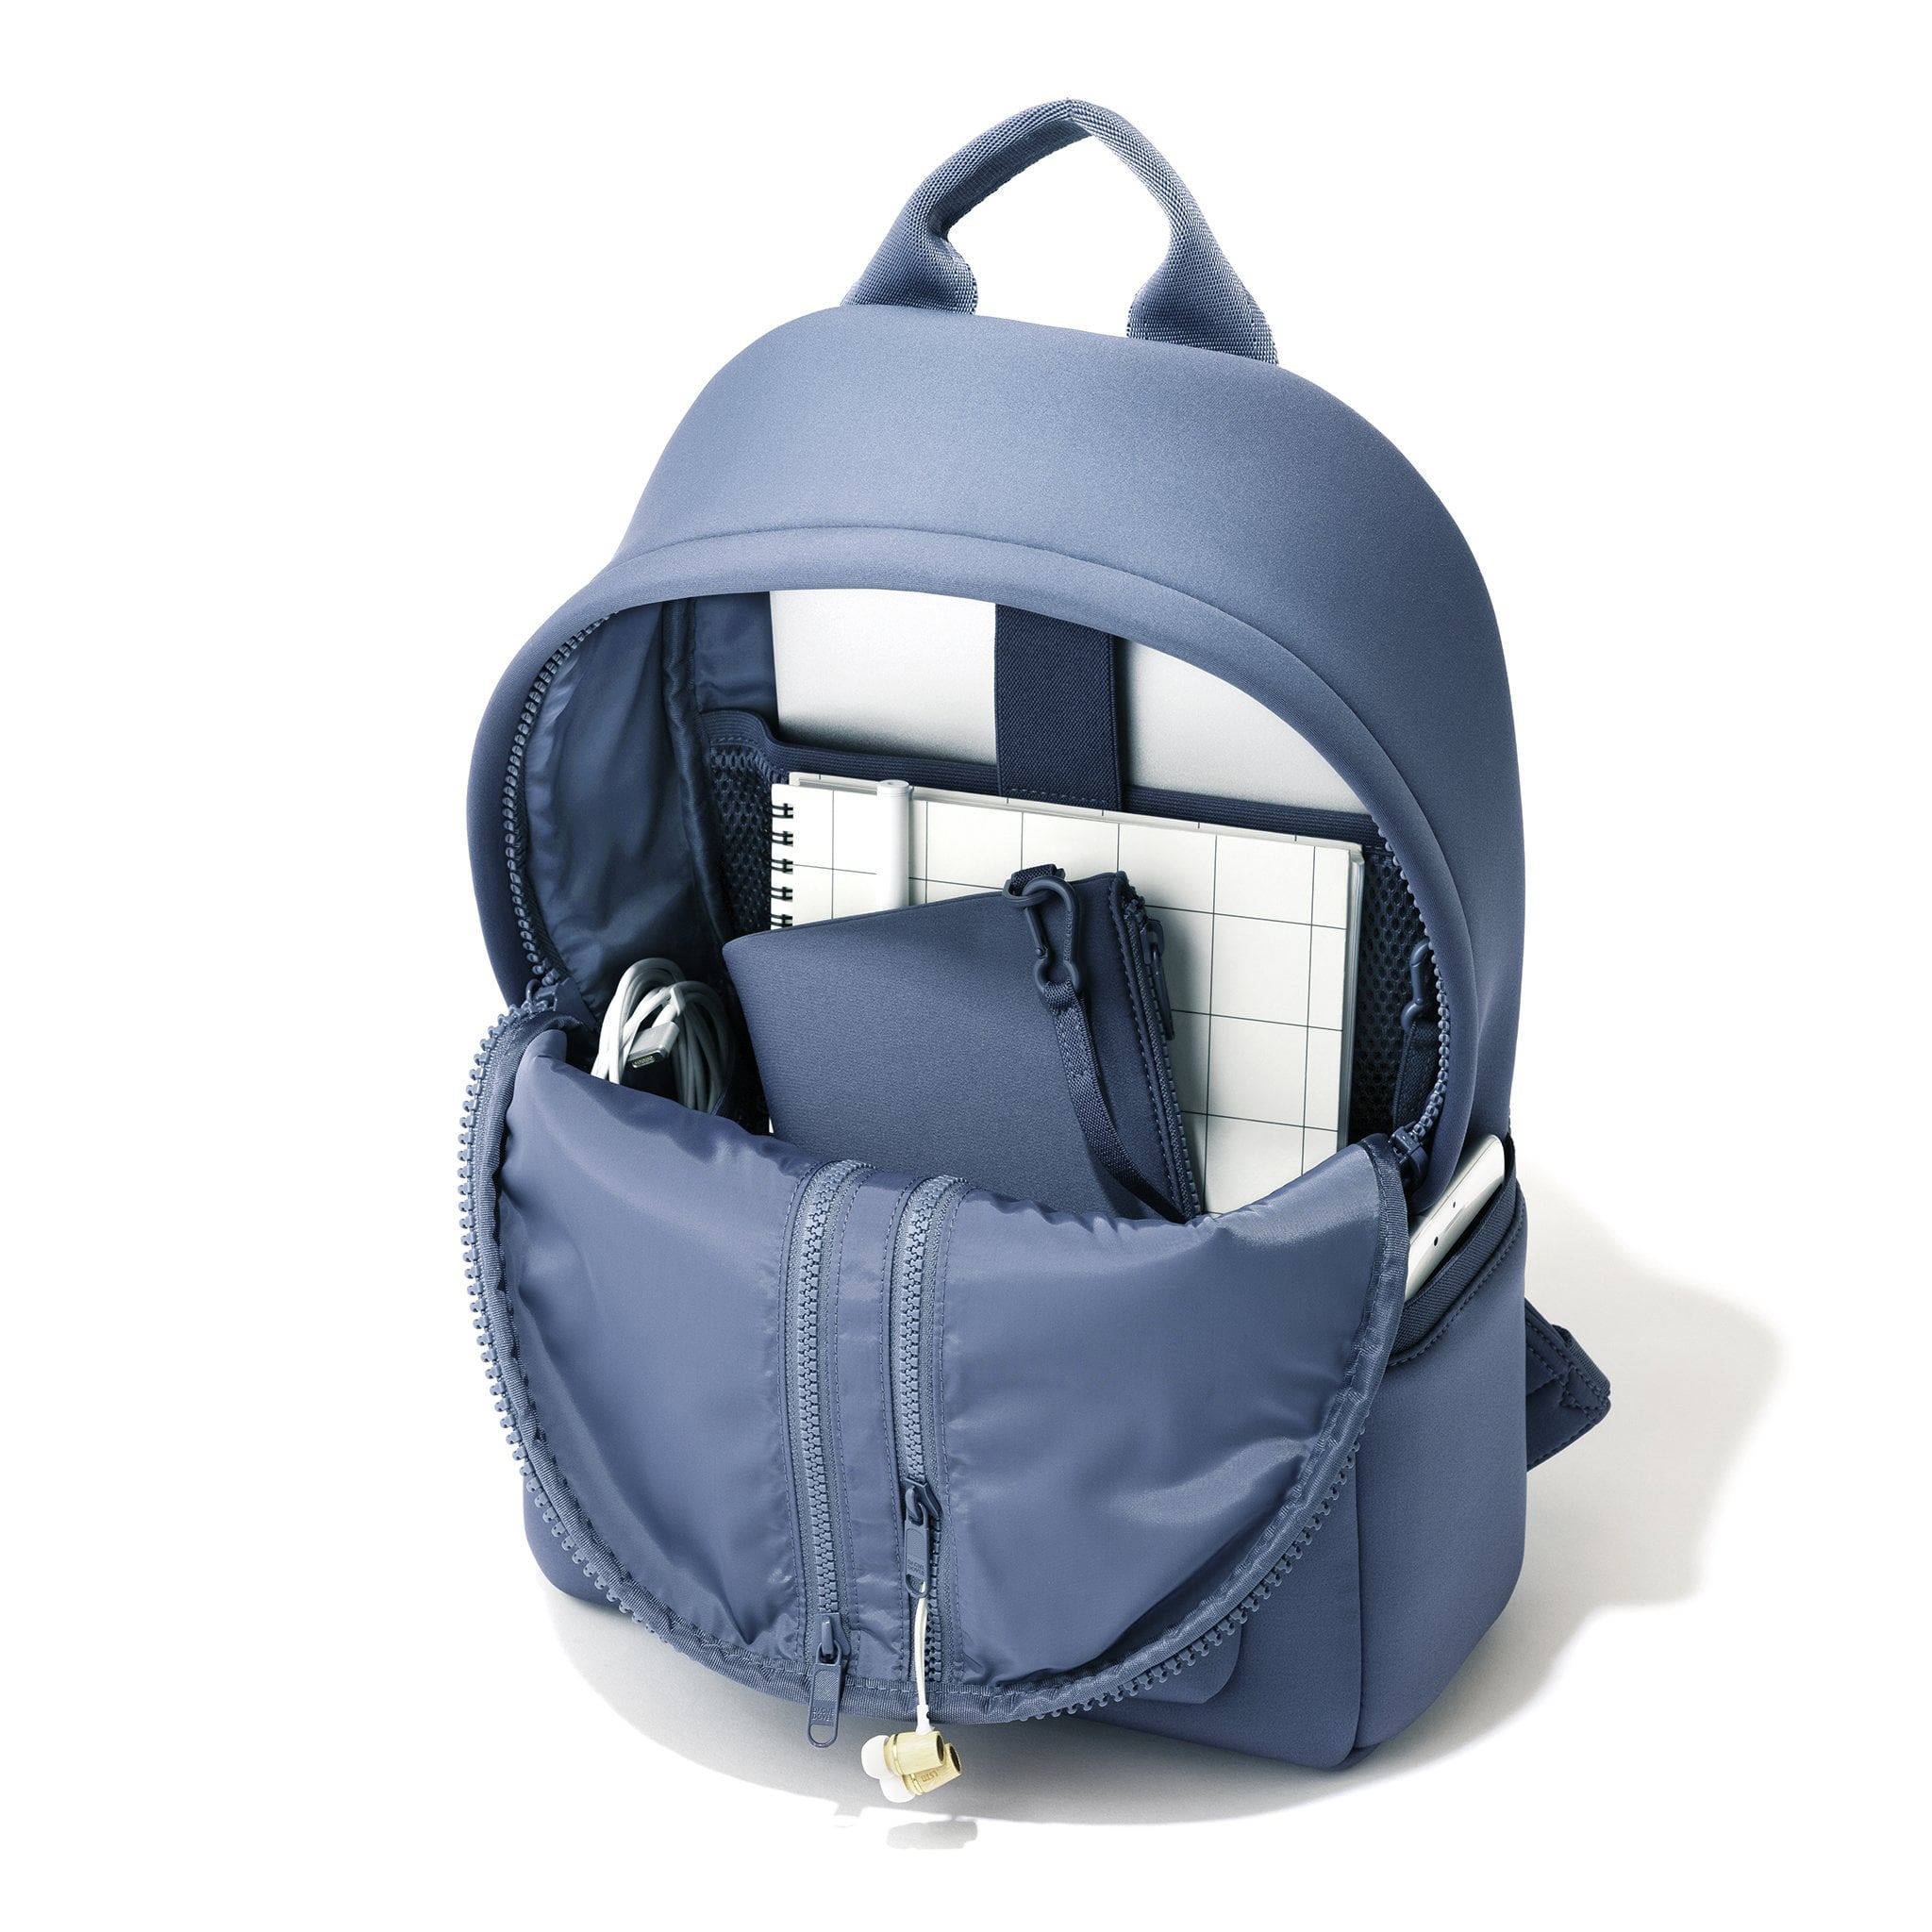 If You Haven't Tried a Dagne Dover Bag Yet, Start With One of These  Bestsellers